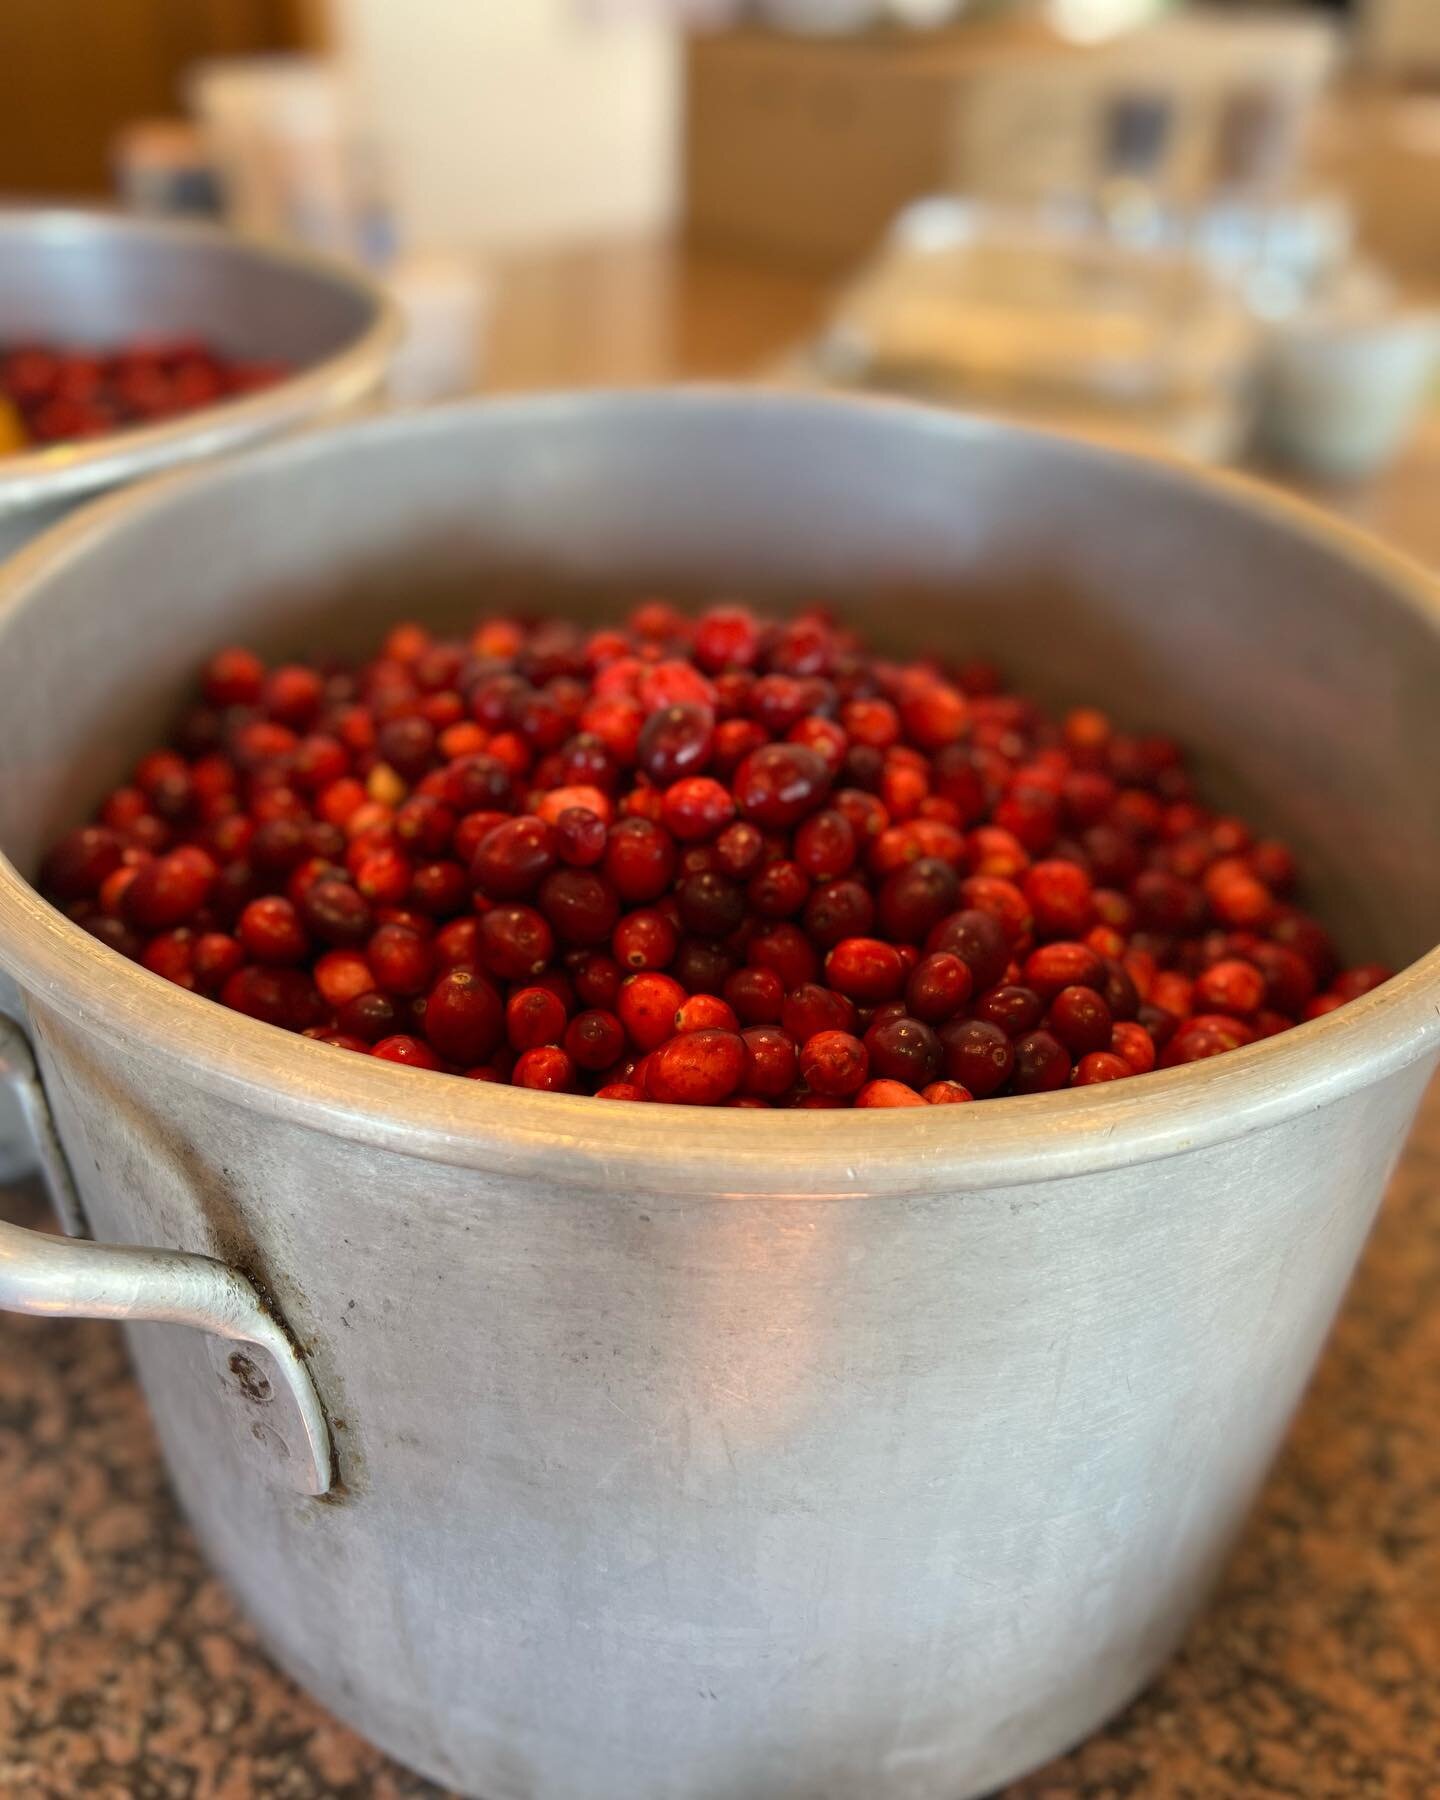 Let the cranberry sauce begin!

The clock is ticking. Place your orders now!

#thanksgiving#foodie#redbank#tintonfalls#shrewsbury#farmtotable#fresh#november